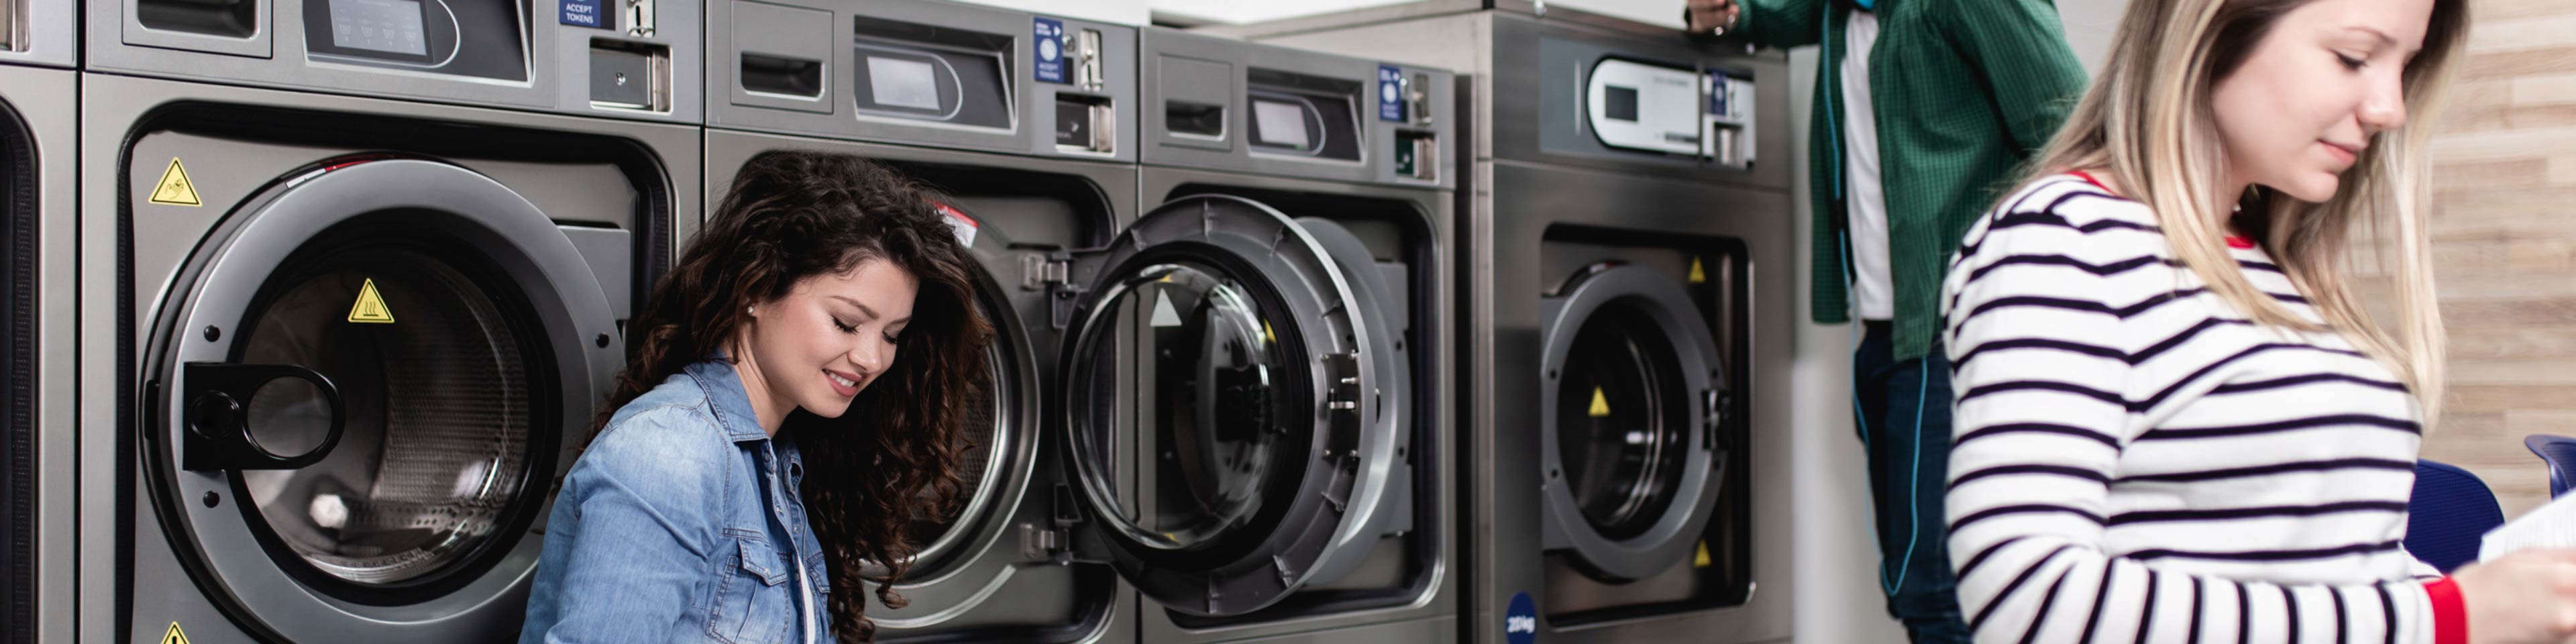 How Much to Wash Clothes at Laundromat: Discover Affordable Prices